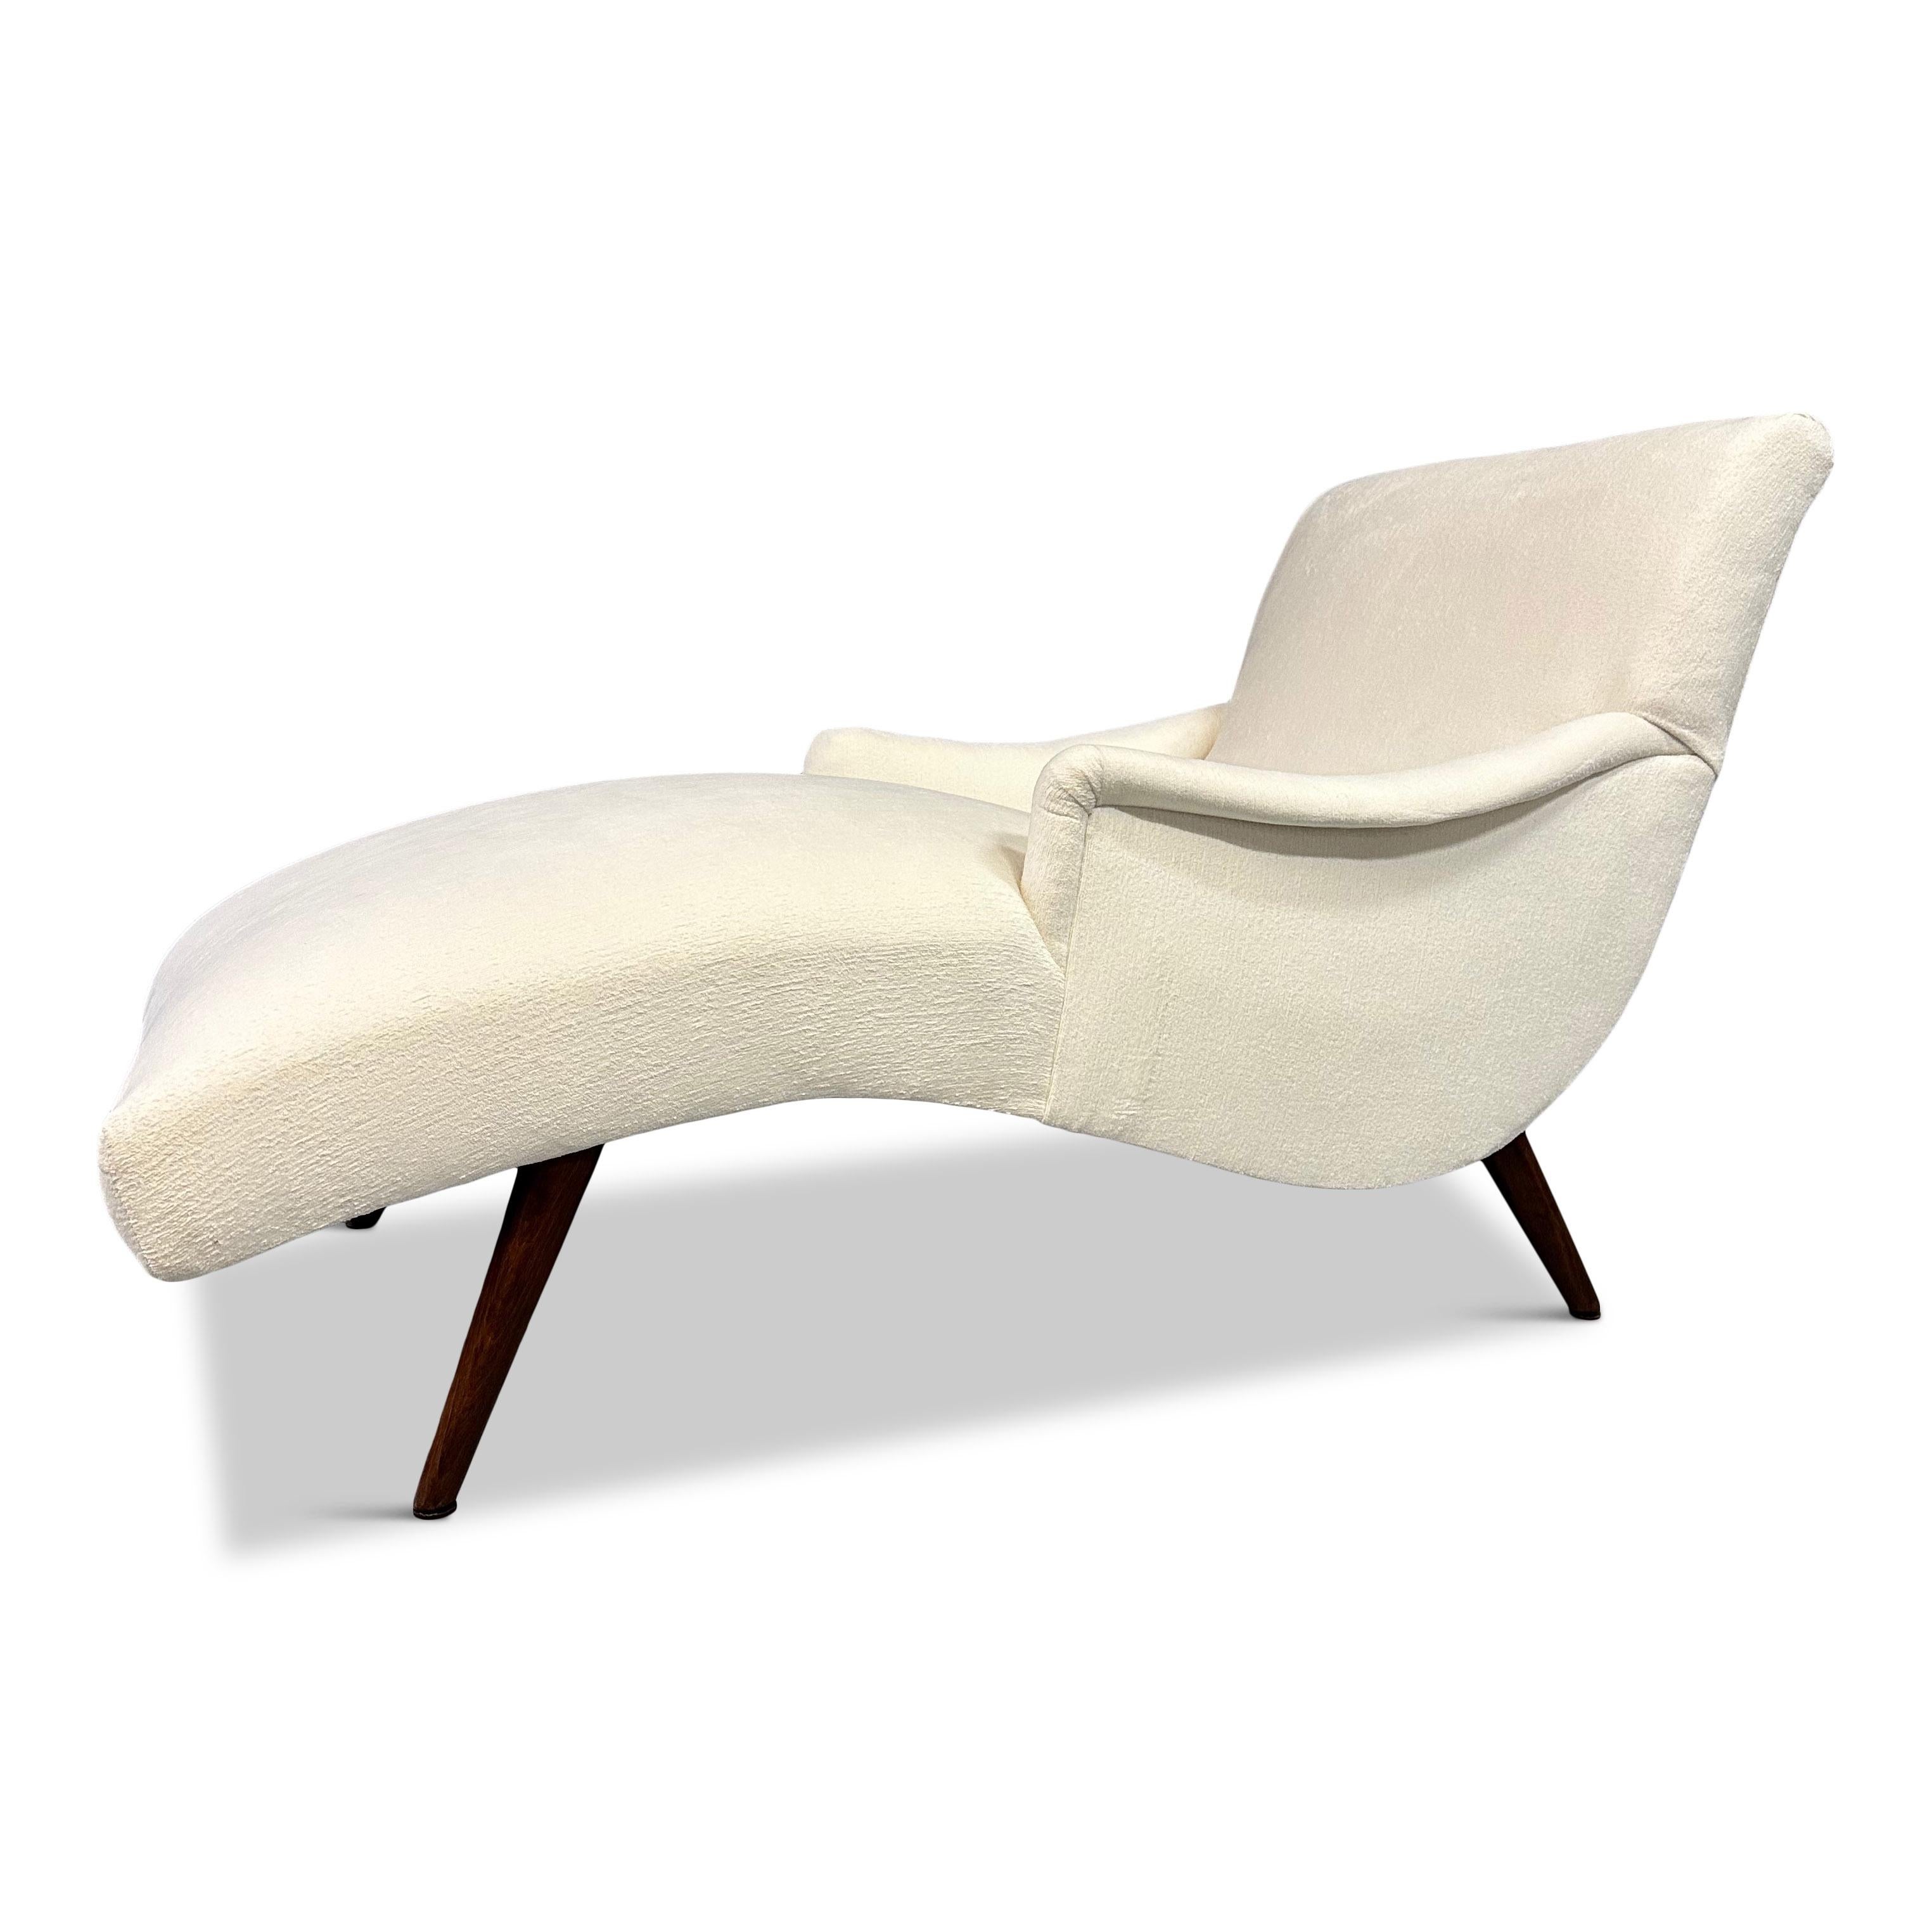 A gorgeous sleek chaise lounge from the 1950s. Newly reupholstered in a textured white velvet with walnut legs refinished in a lovely medium color.